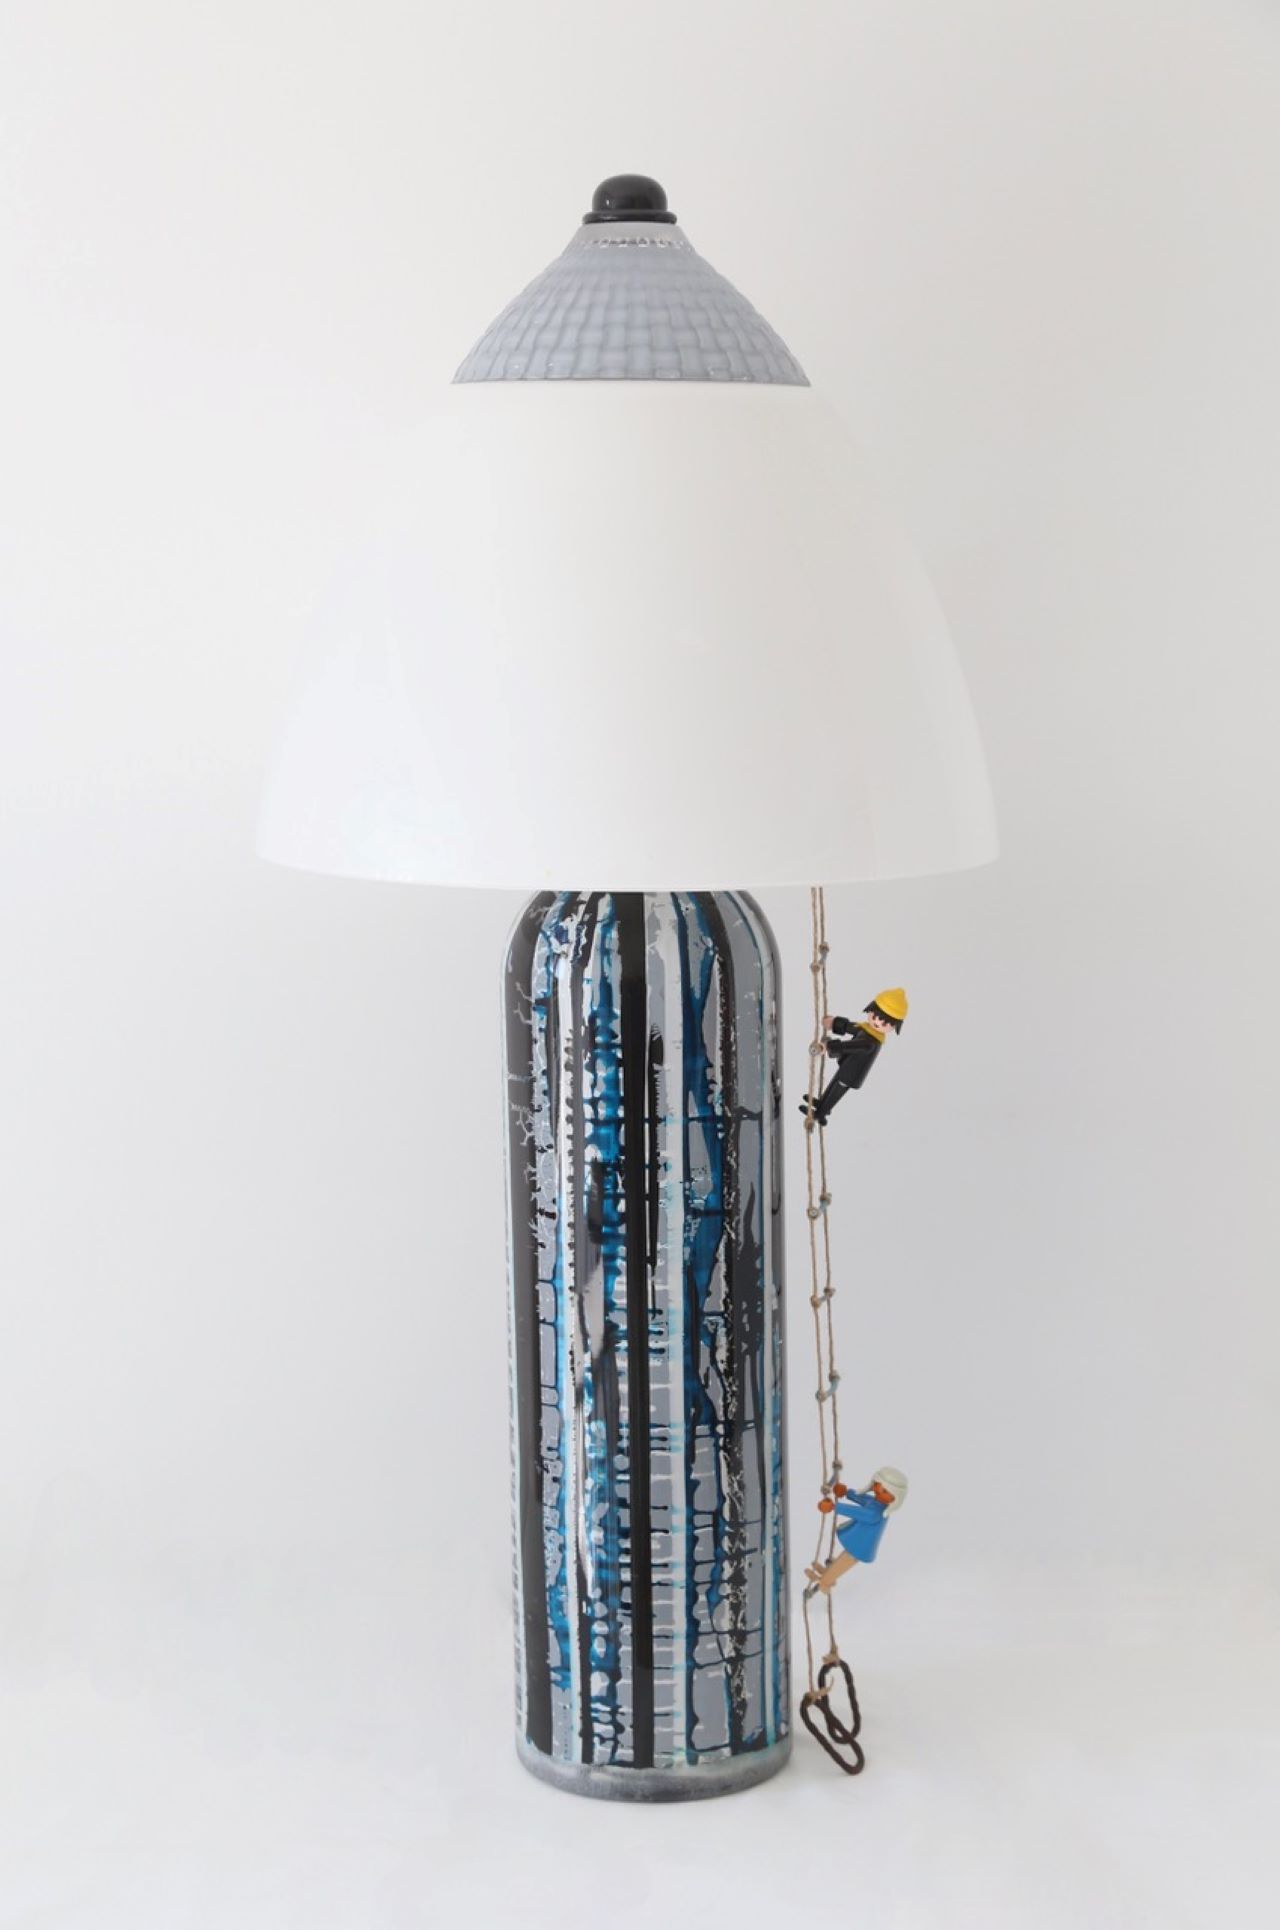 MA CABANE, 2023, large wine bottle, glass lampshade, salad bowl, perfume bottle stopper; ladder: string and bits of cable, PLAYMOBIL characters, H 84 cm / Æ 38 cm, Work photo: Siggy Kirsch